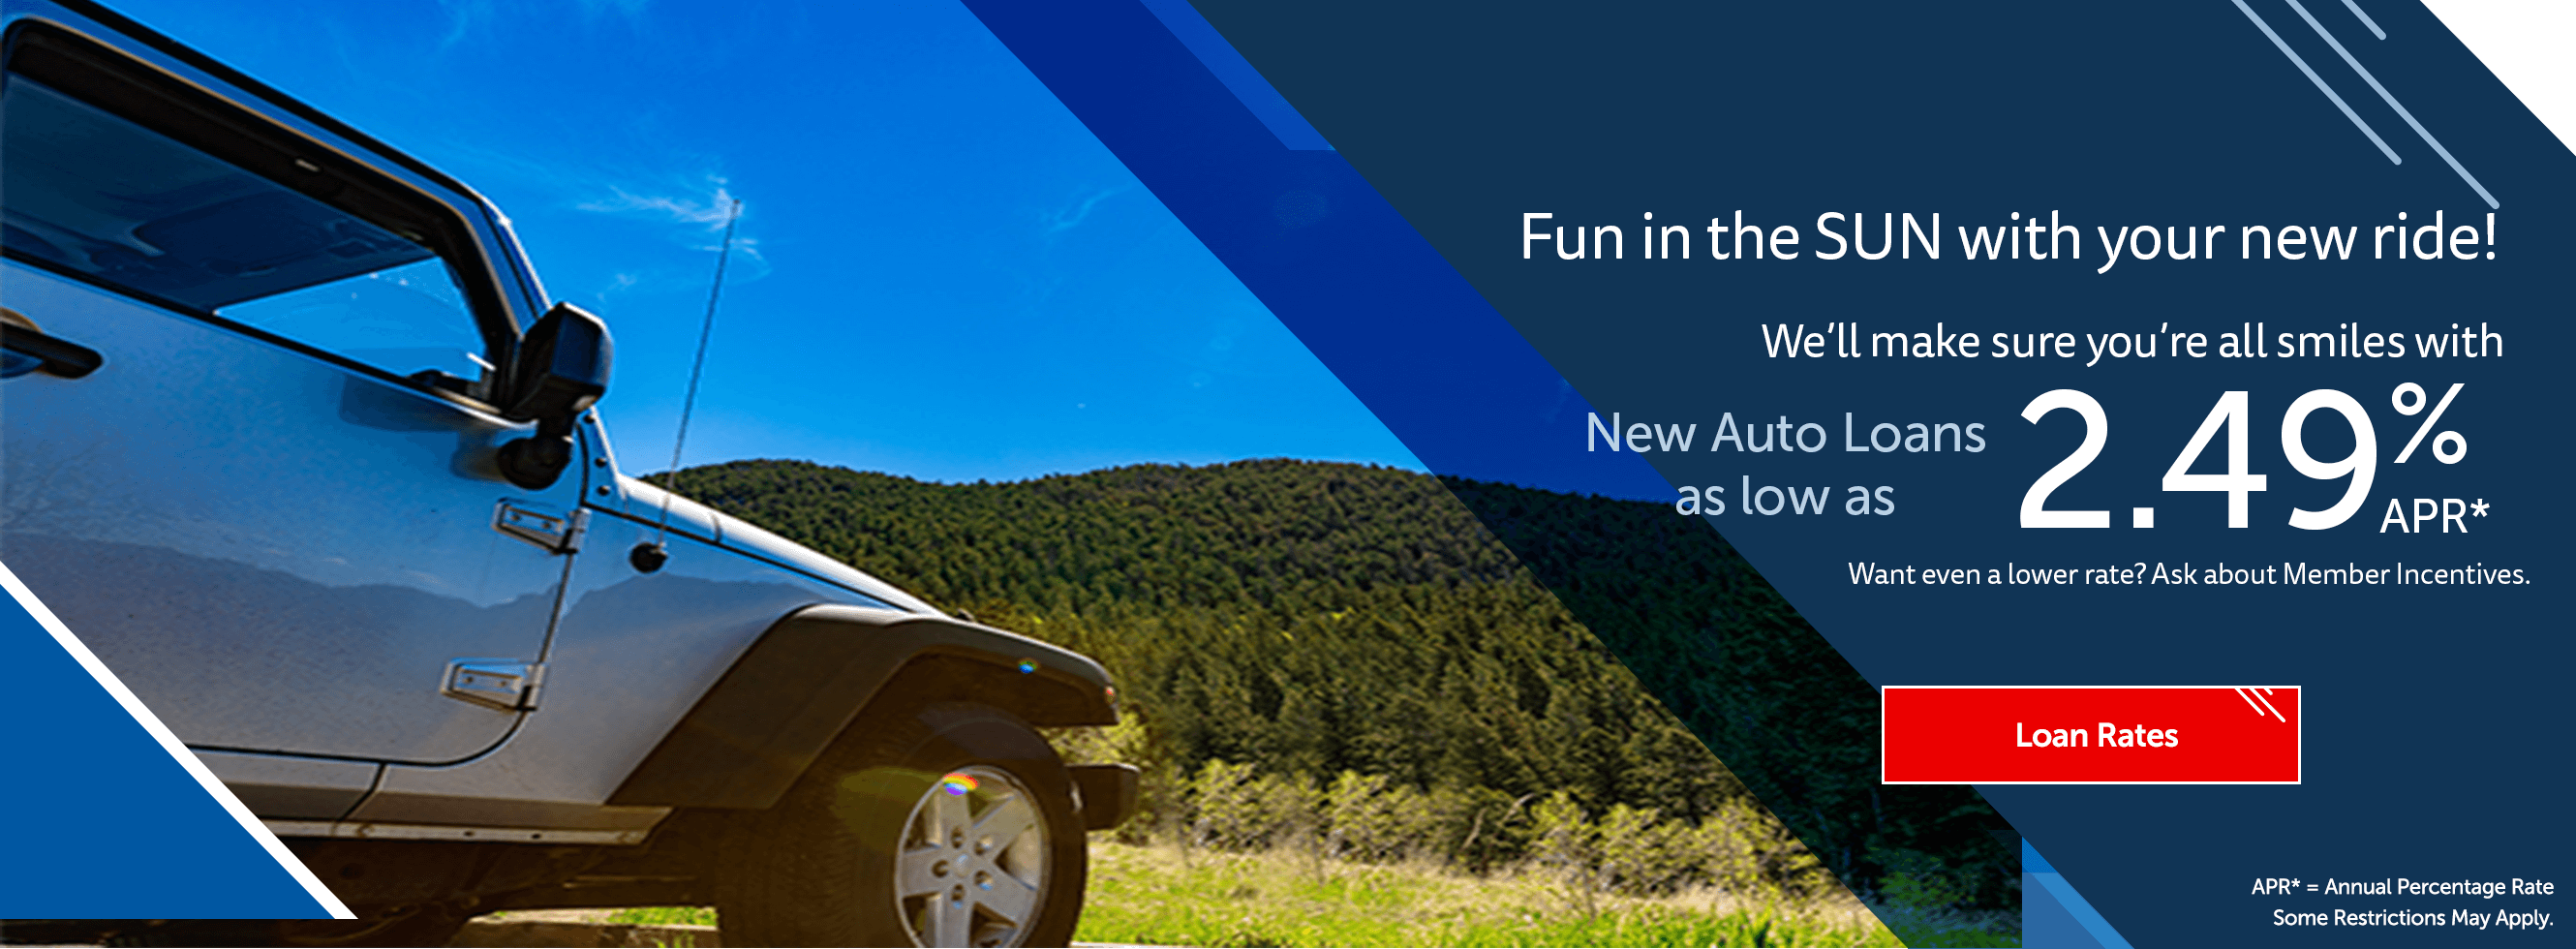 Fun in the SUN with your new ride! We'll make sure you're all smile with New Auto Loans as low as